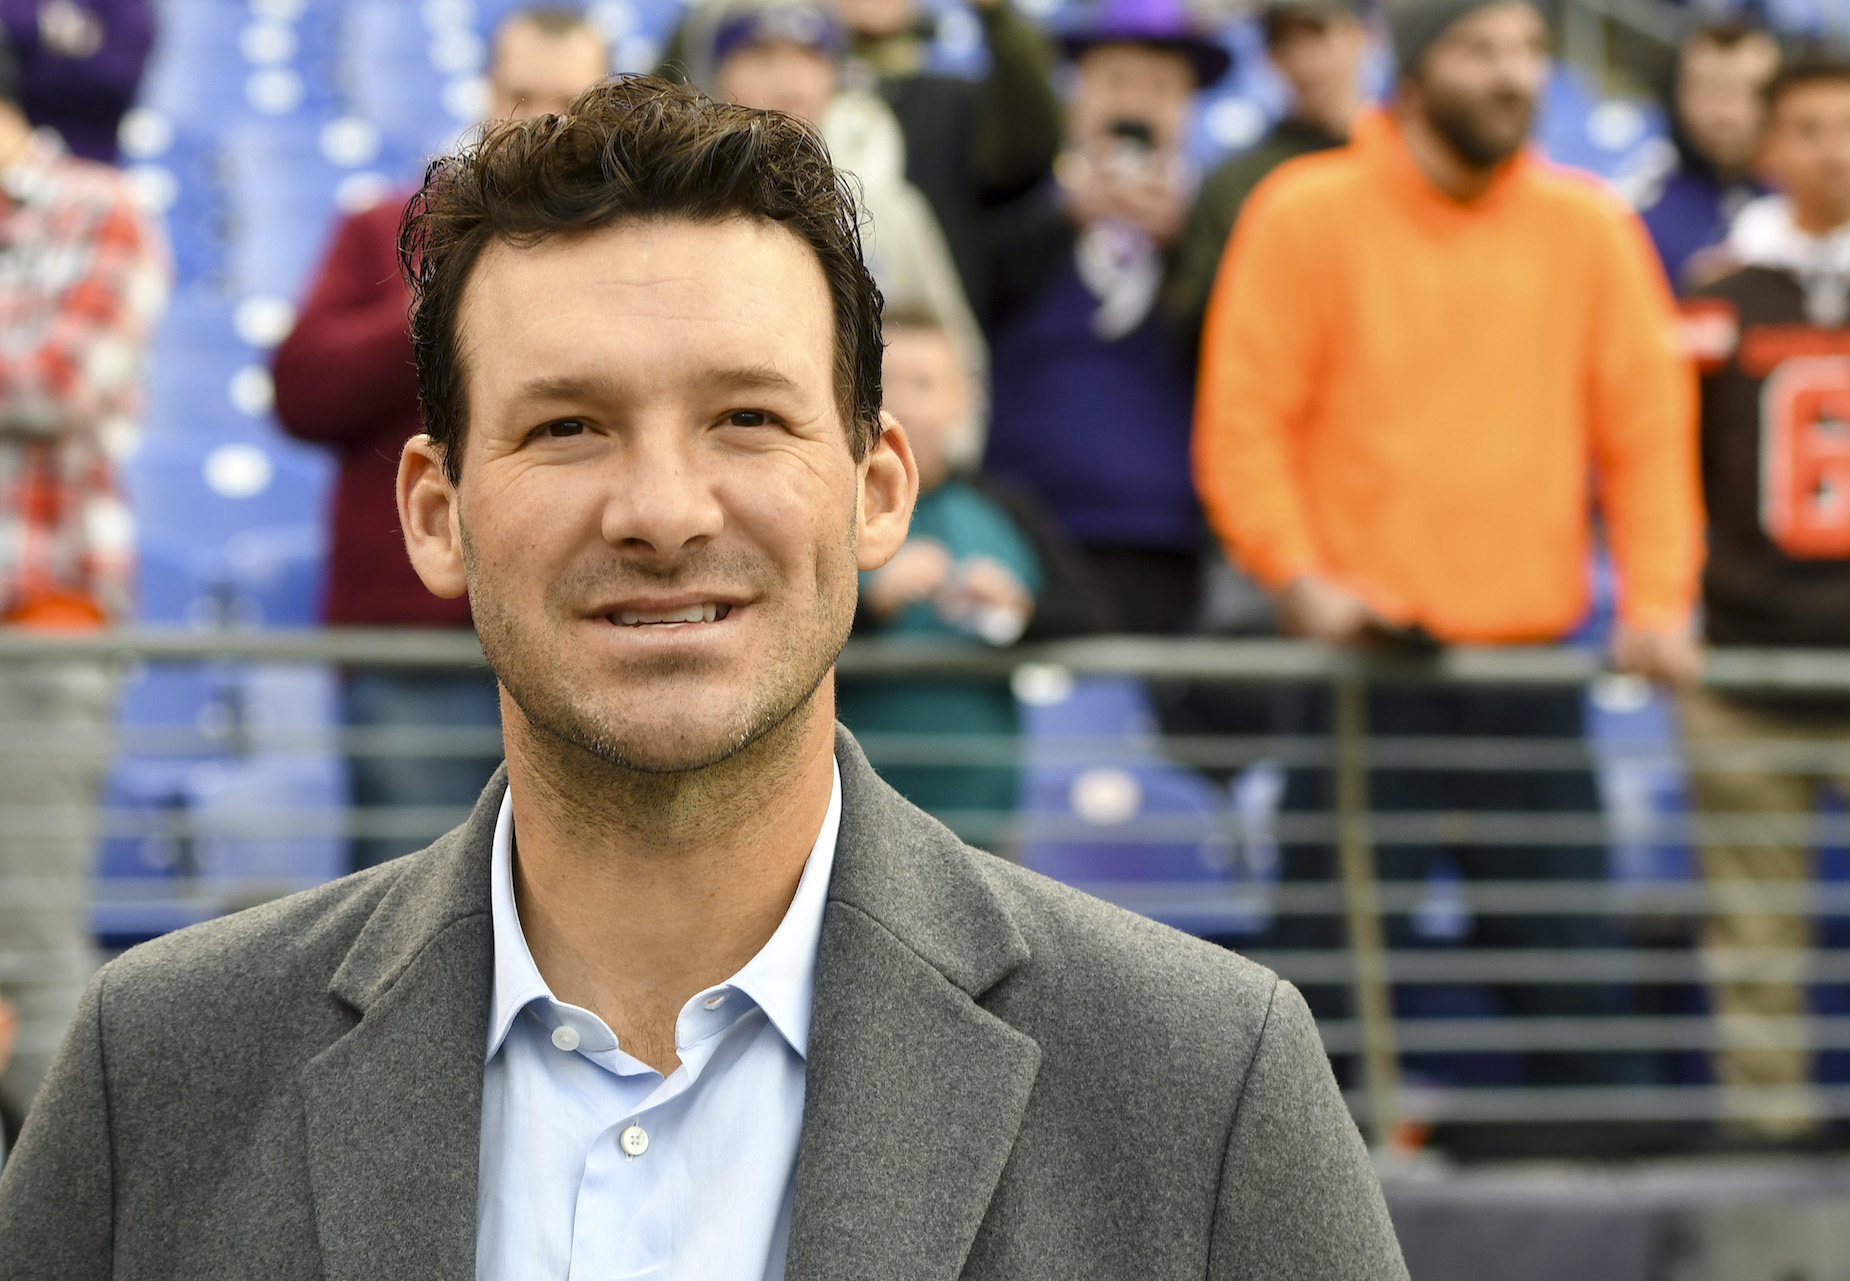 Tony Romo is known for his in-game predictions, but he tried to dial them back in 2020.